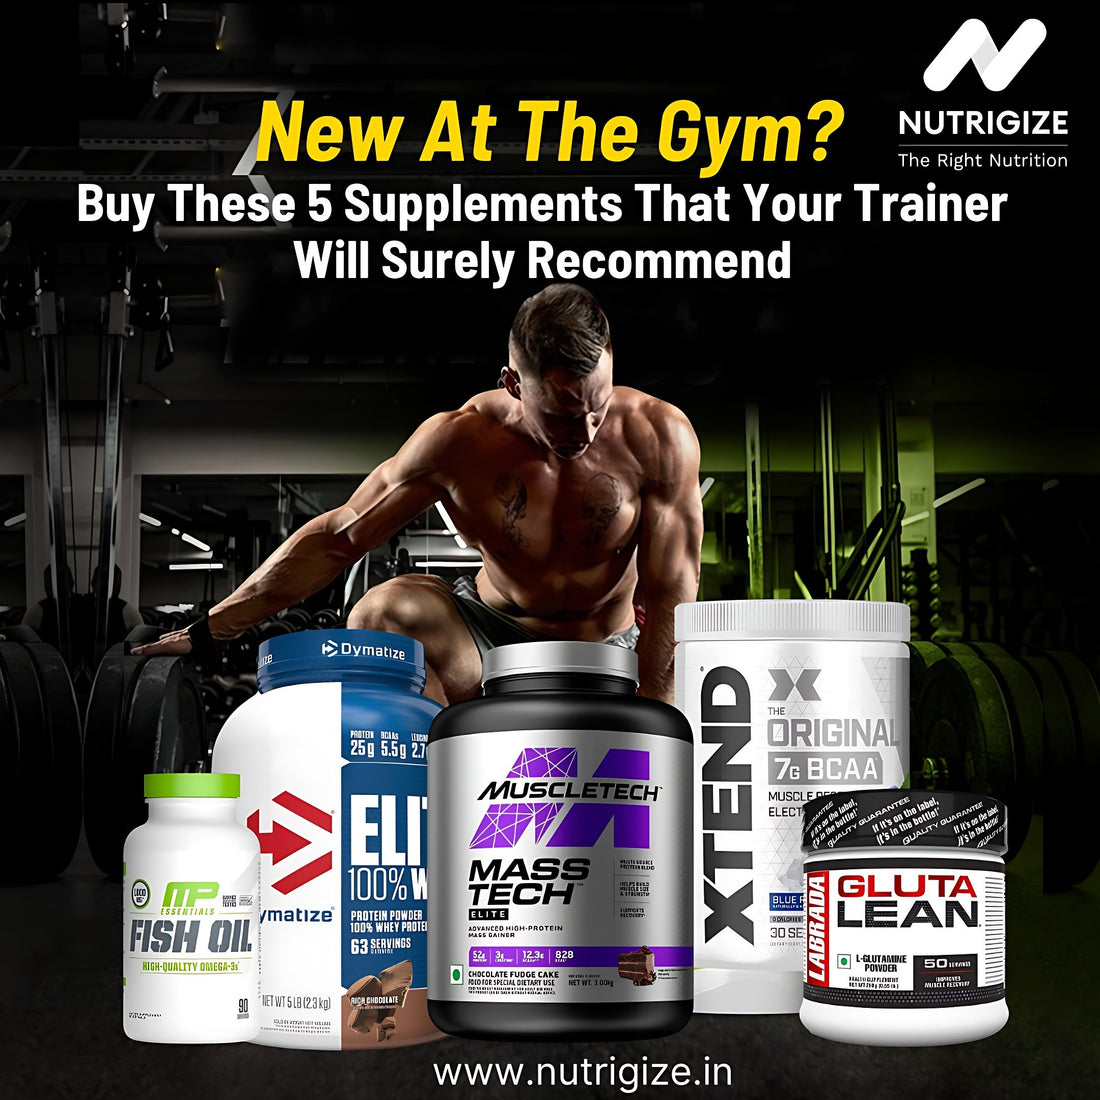 New At The Gym? Buy These 5 Supplements That Your Trainer Will Surely Recommend - Nutrigize